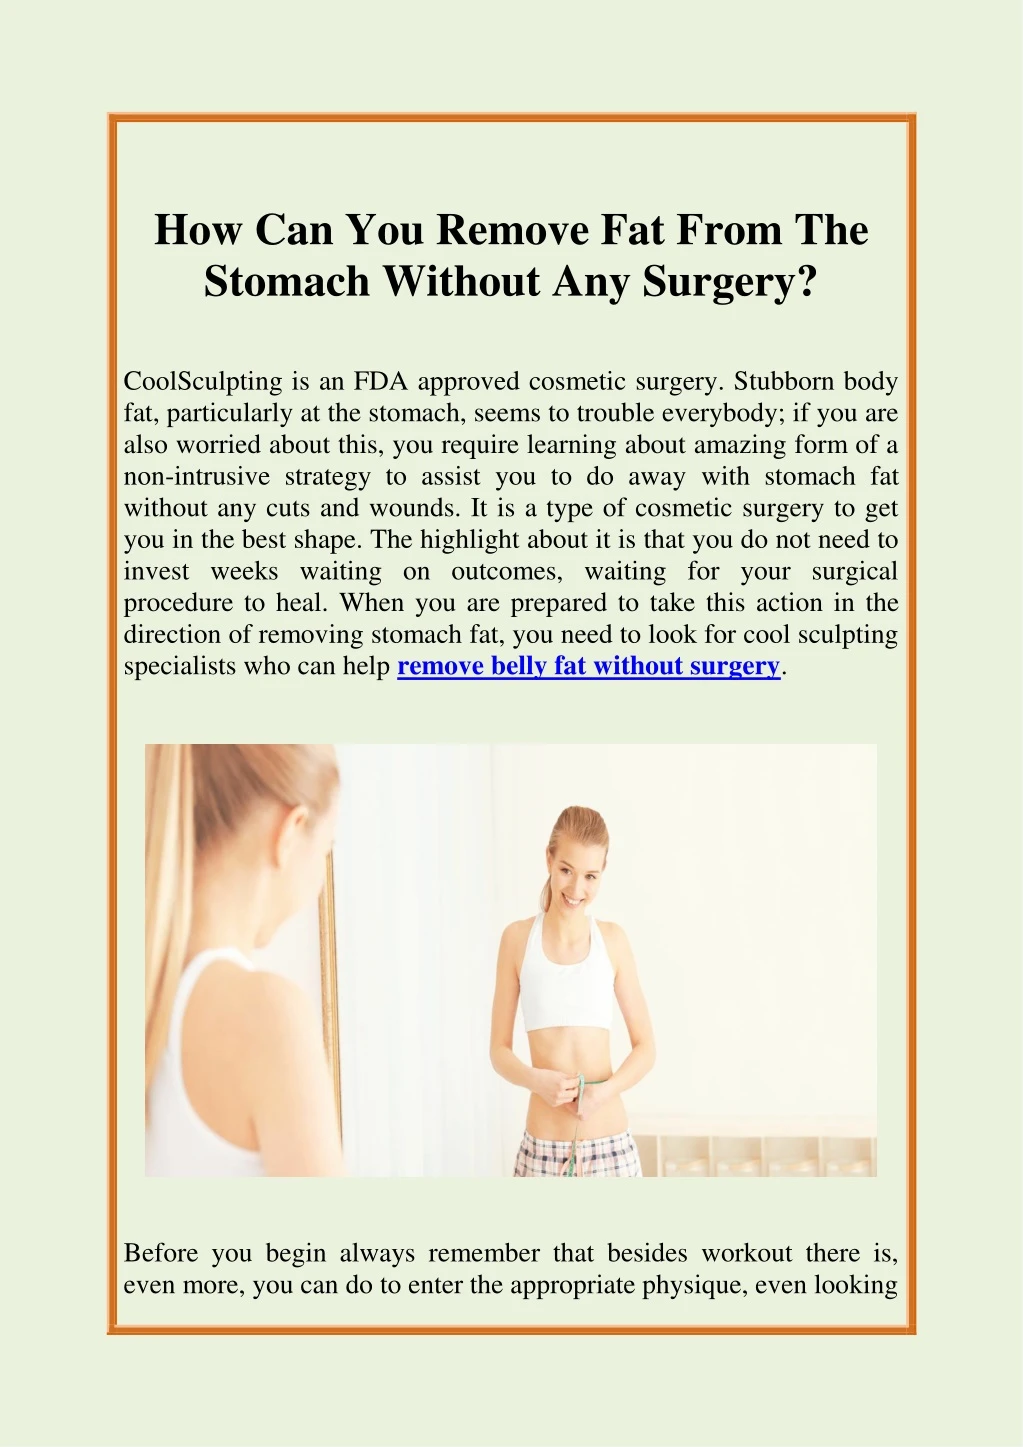 how can you remove fat from the stomach without